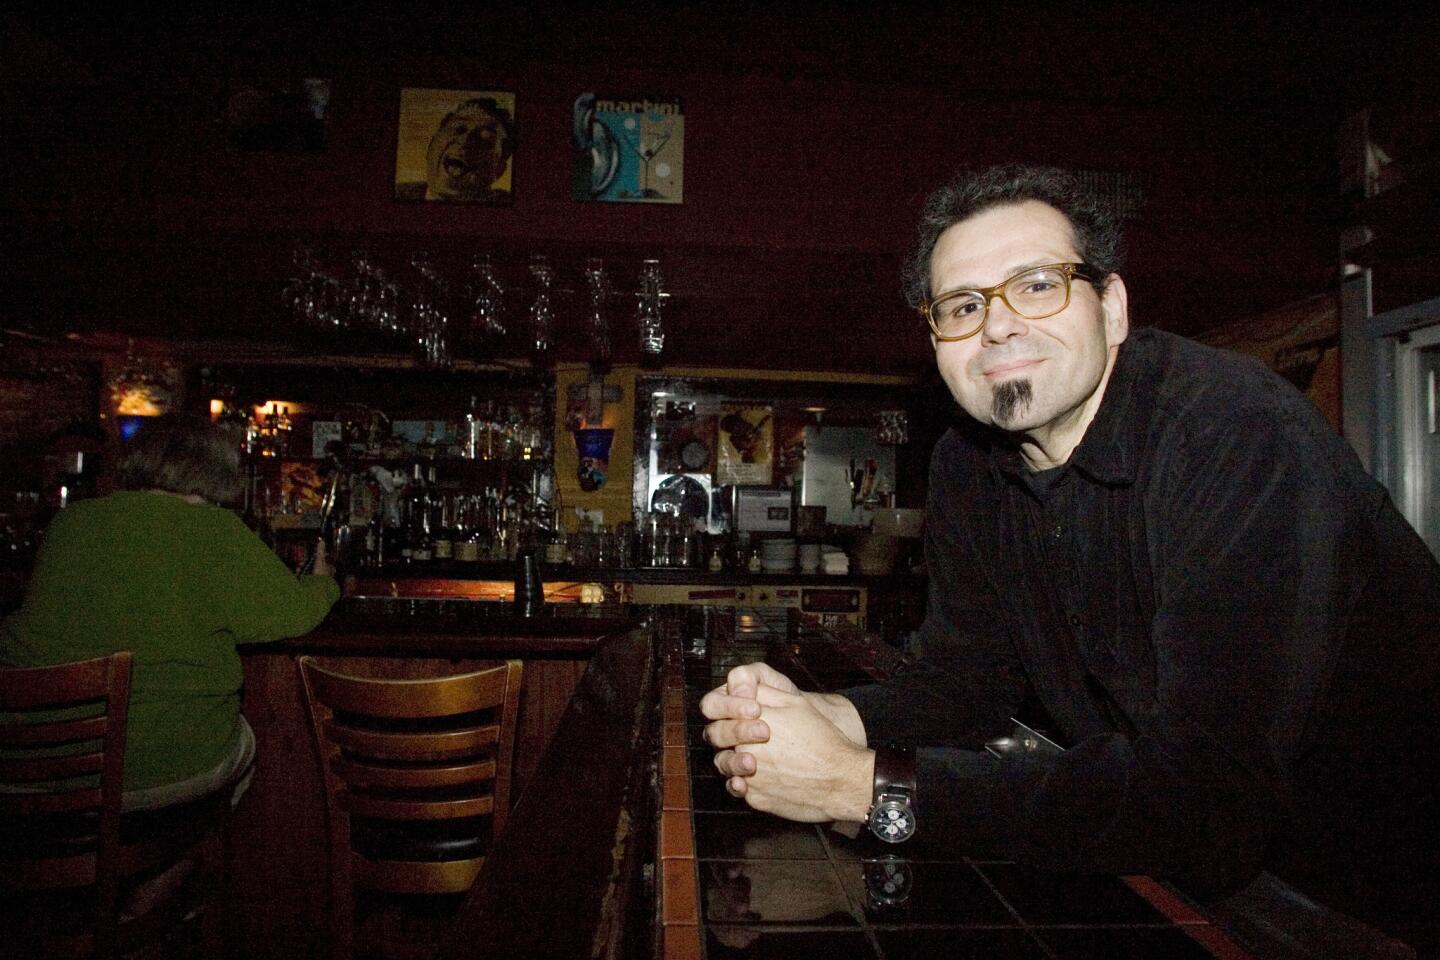 Mario Lalli poses for the camera at Cafe 322 in Sierra Madre on Wednesday, March 14, 2012. Cafe 322 is a family run business owned by Mario. Mario is also a musician and has been a major influence on bands like Queens of the Stone Age and Kyuss.